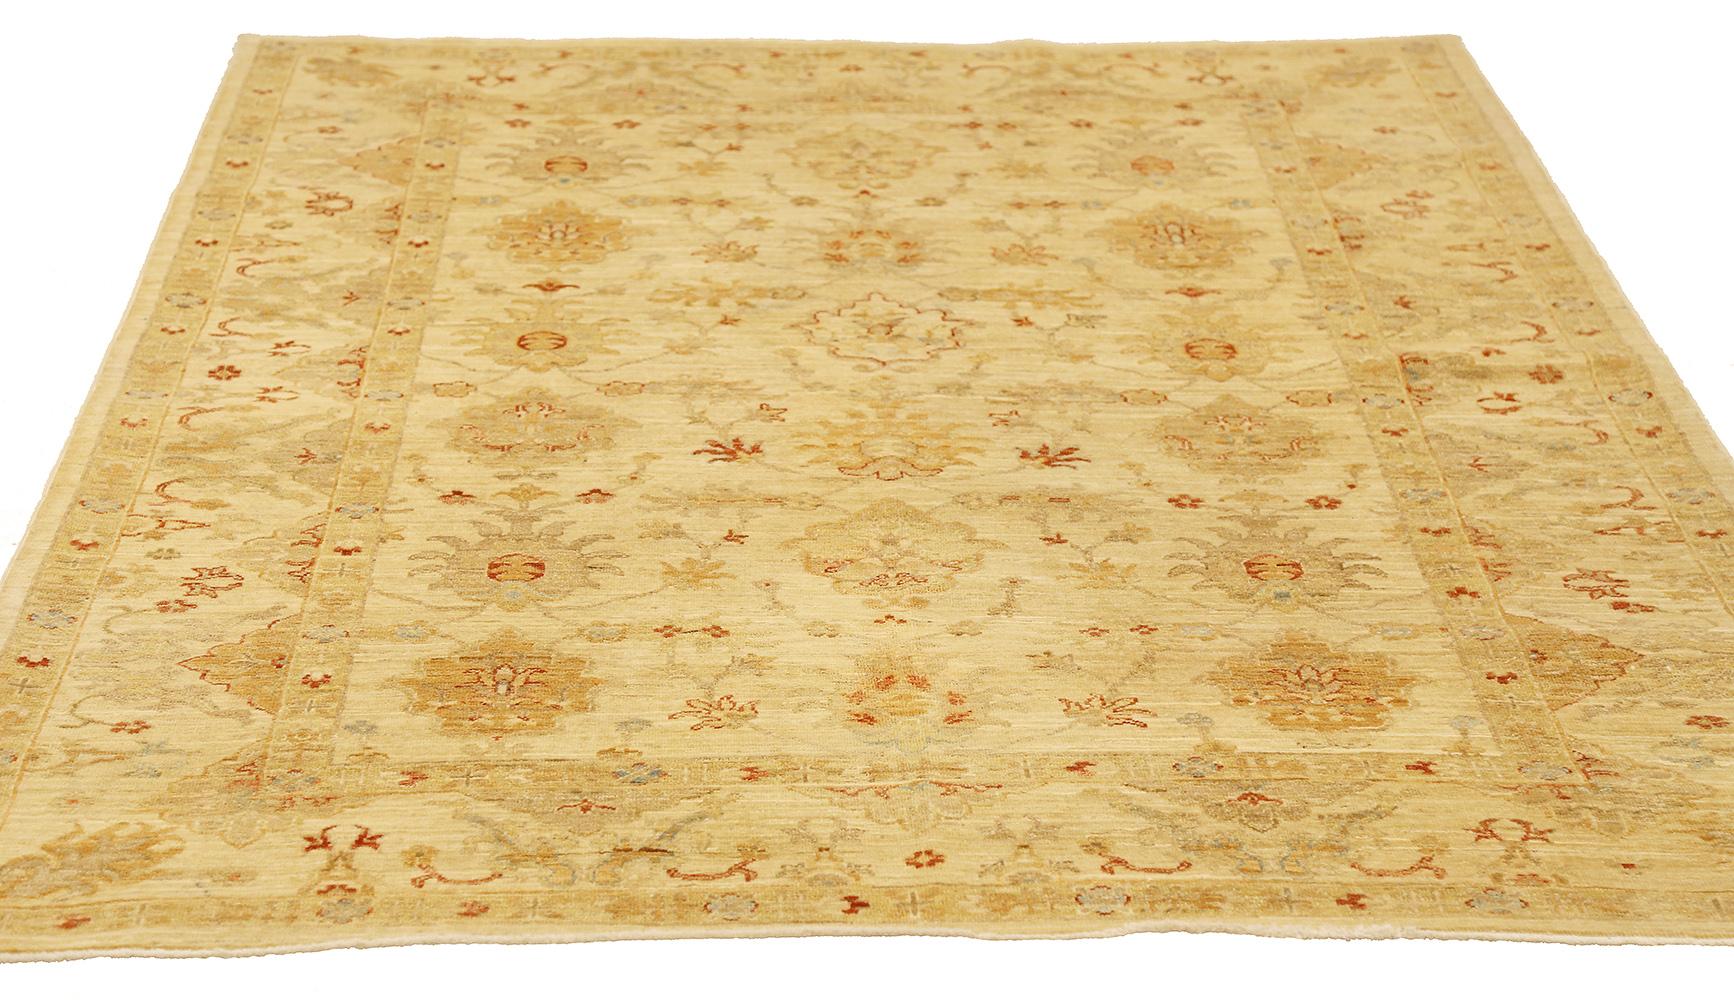 New Persian rug handwoven from the finest sheep’s wool and colored with all-natural vegetable dyes that are safe for humans and pets. It’s a traditional Tabriz weaving featuring a lovely and extraordinary ensemble of floral designs over an ivory